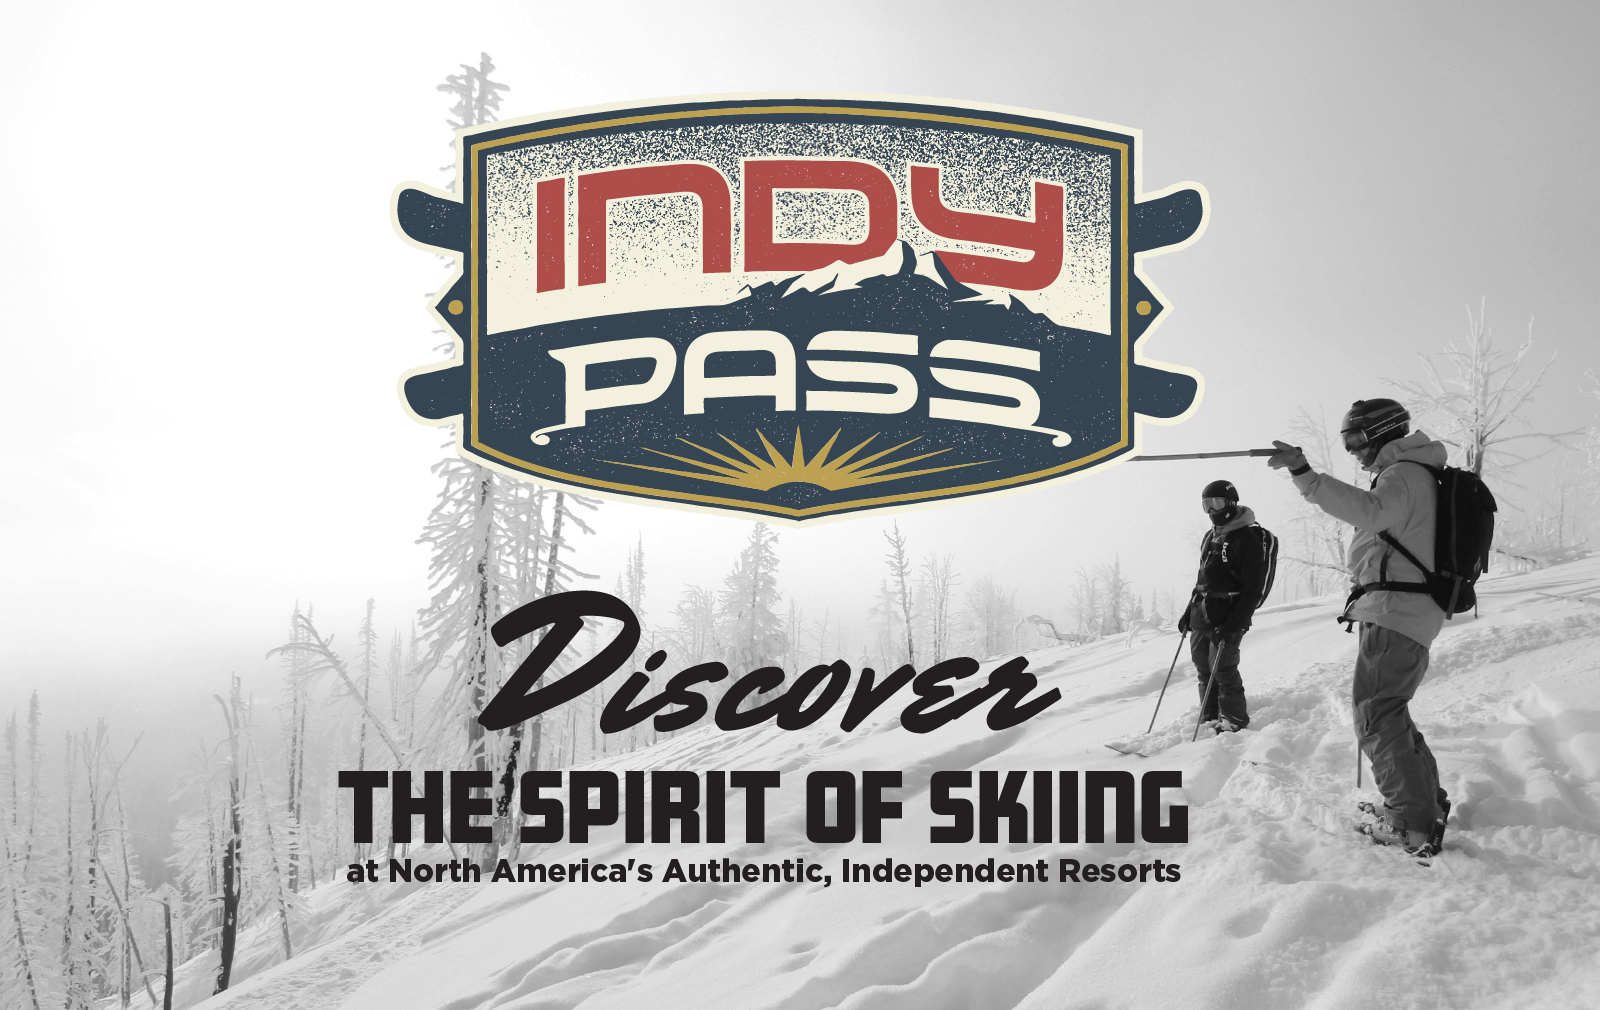 Link to the Indy Pass website